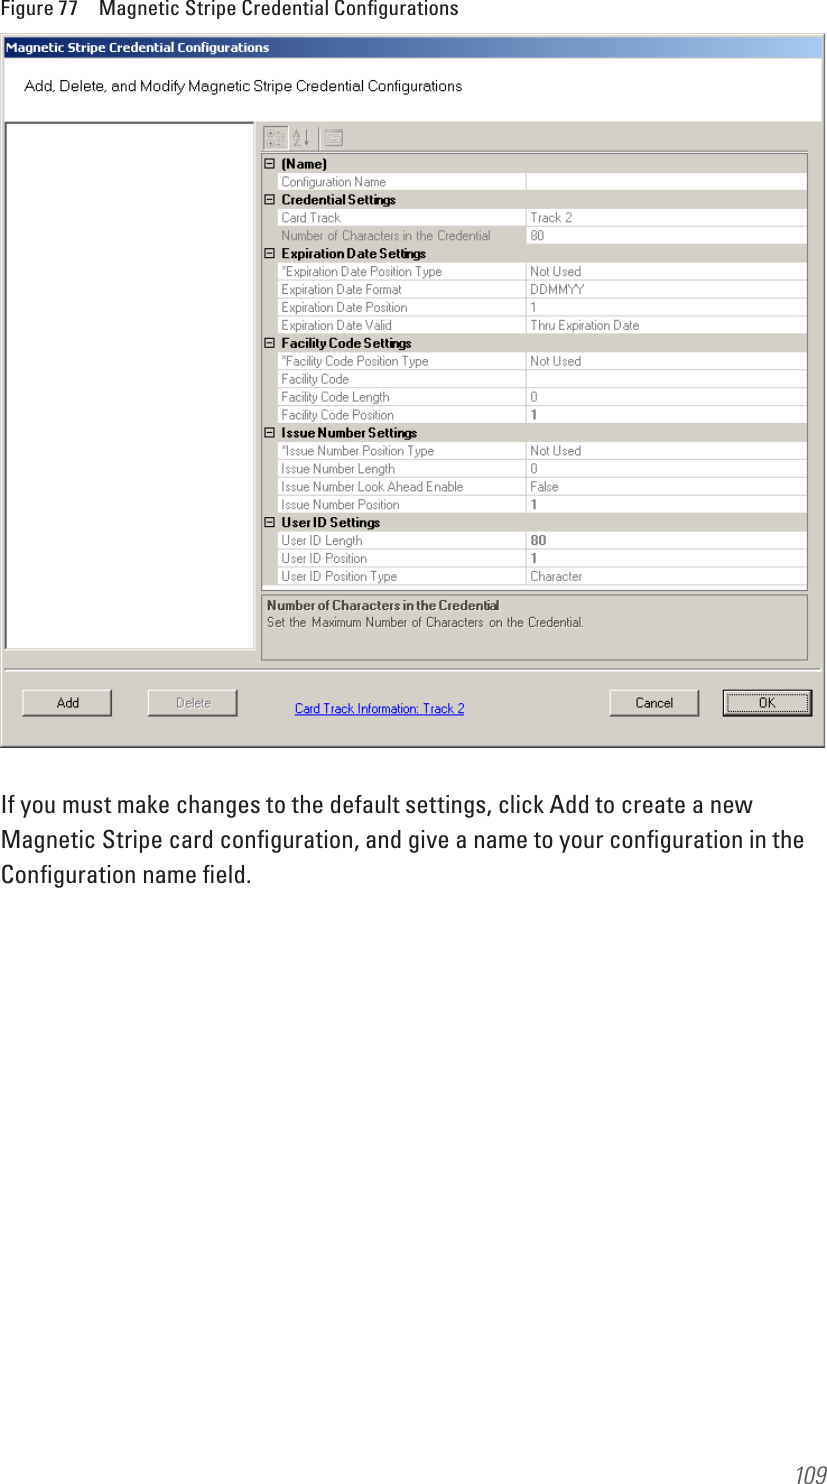 109Figure 77  Magnetic Stripe Credential ConﬁgurationsIf you must make changes to the default settings, click Add to create a new Magnetic Stripe card conﬁguration, and give a name to your conﬁguration in the Conﬁguration name ﬁeld.